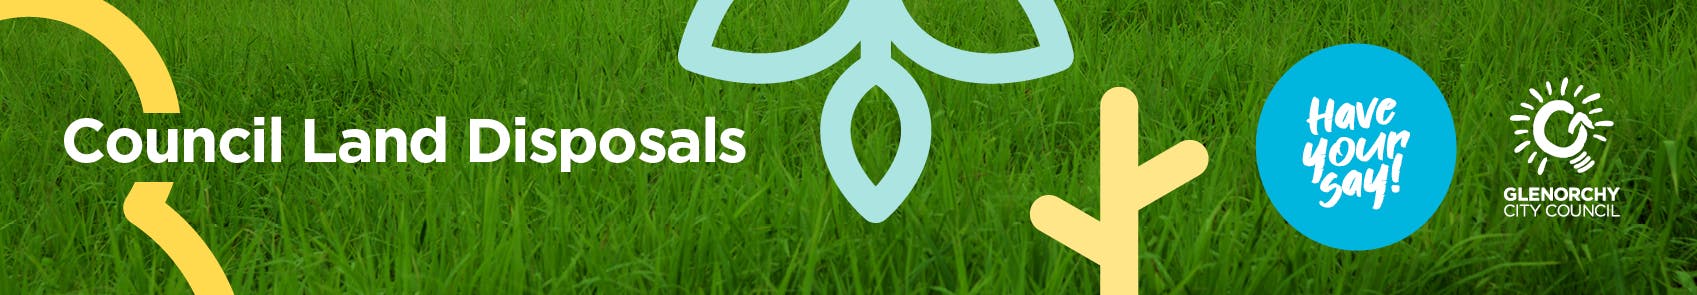 Banner with grass background and text Council Land Disposals and Have you Say and Council Logo 